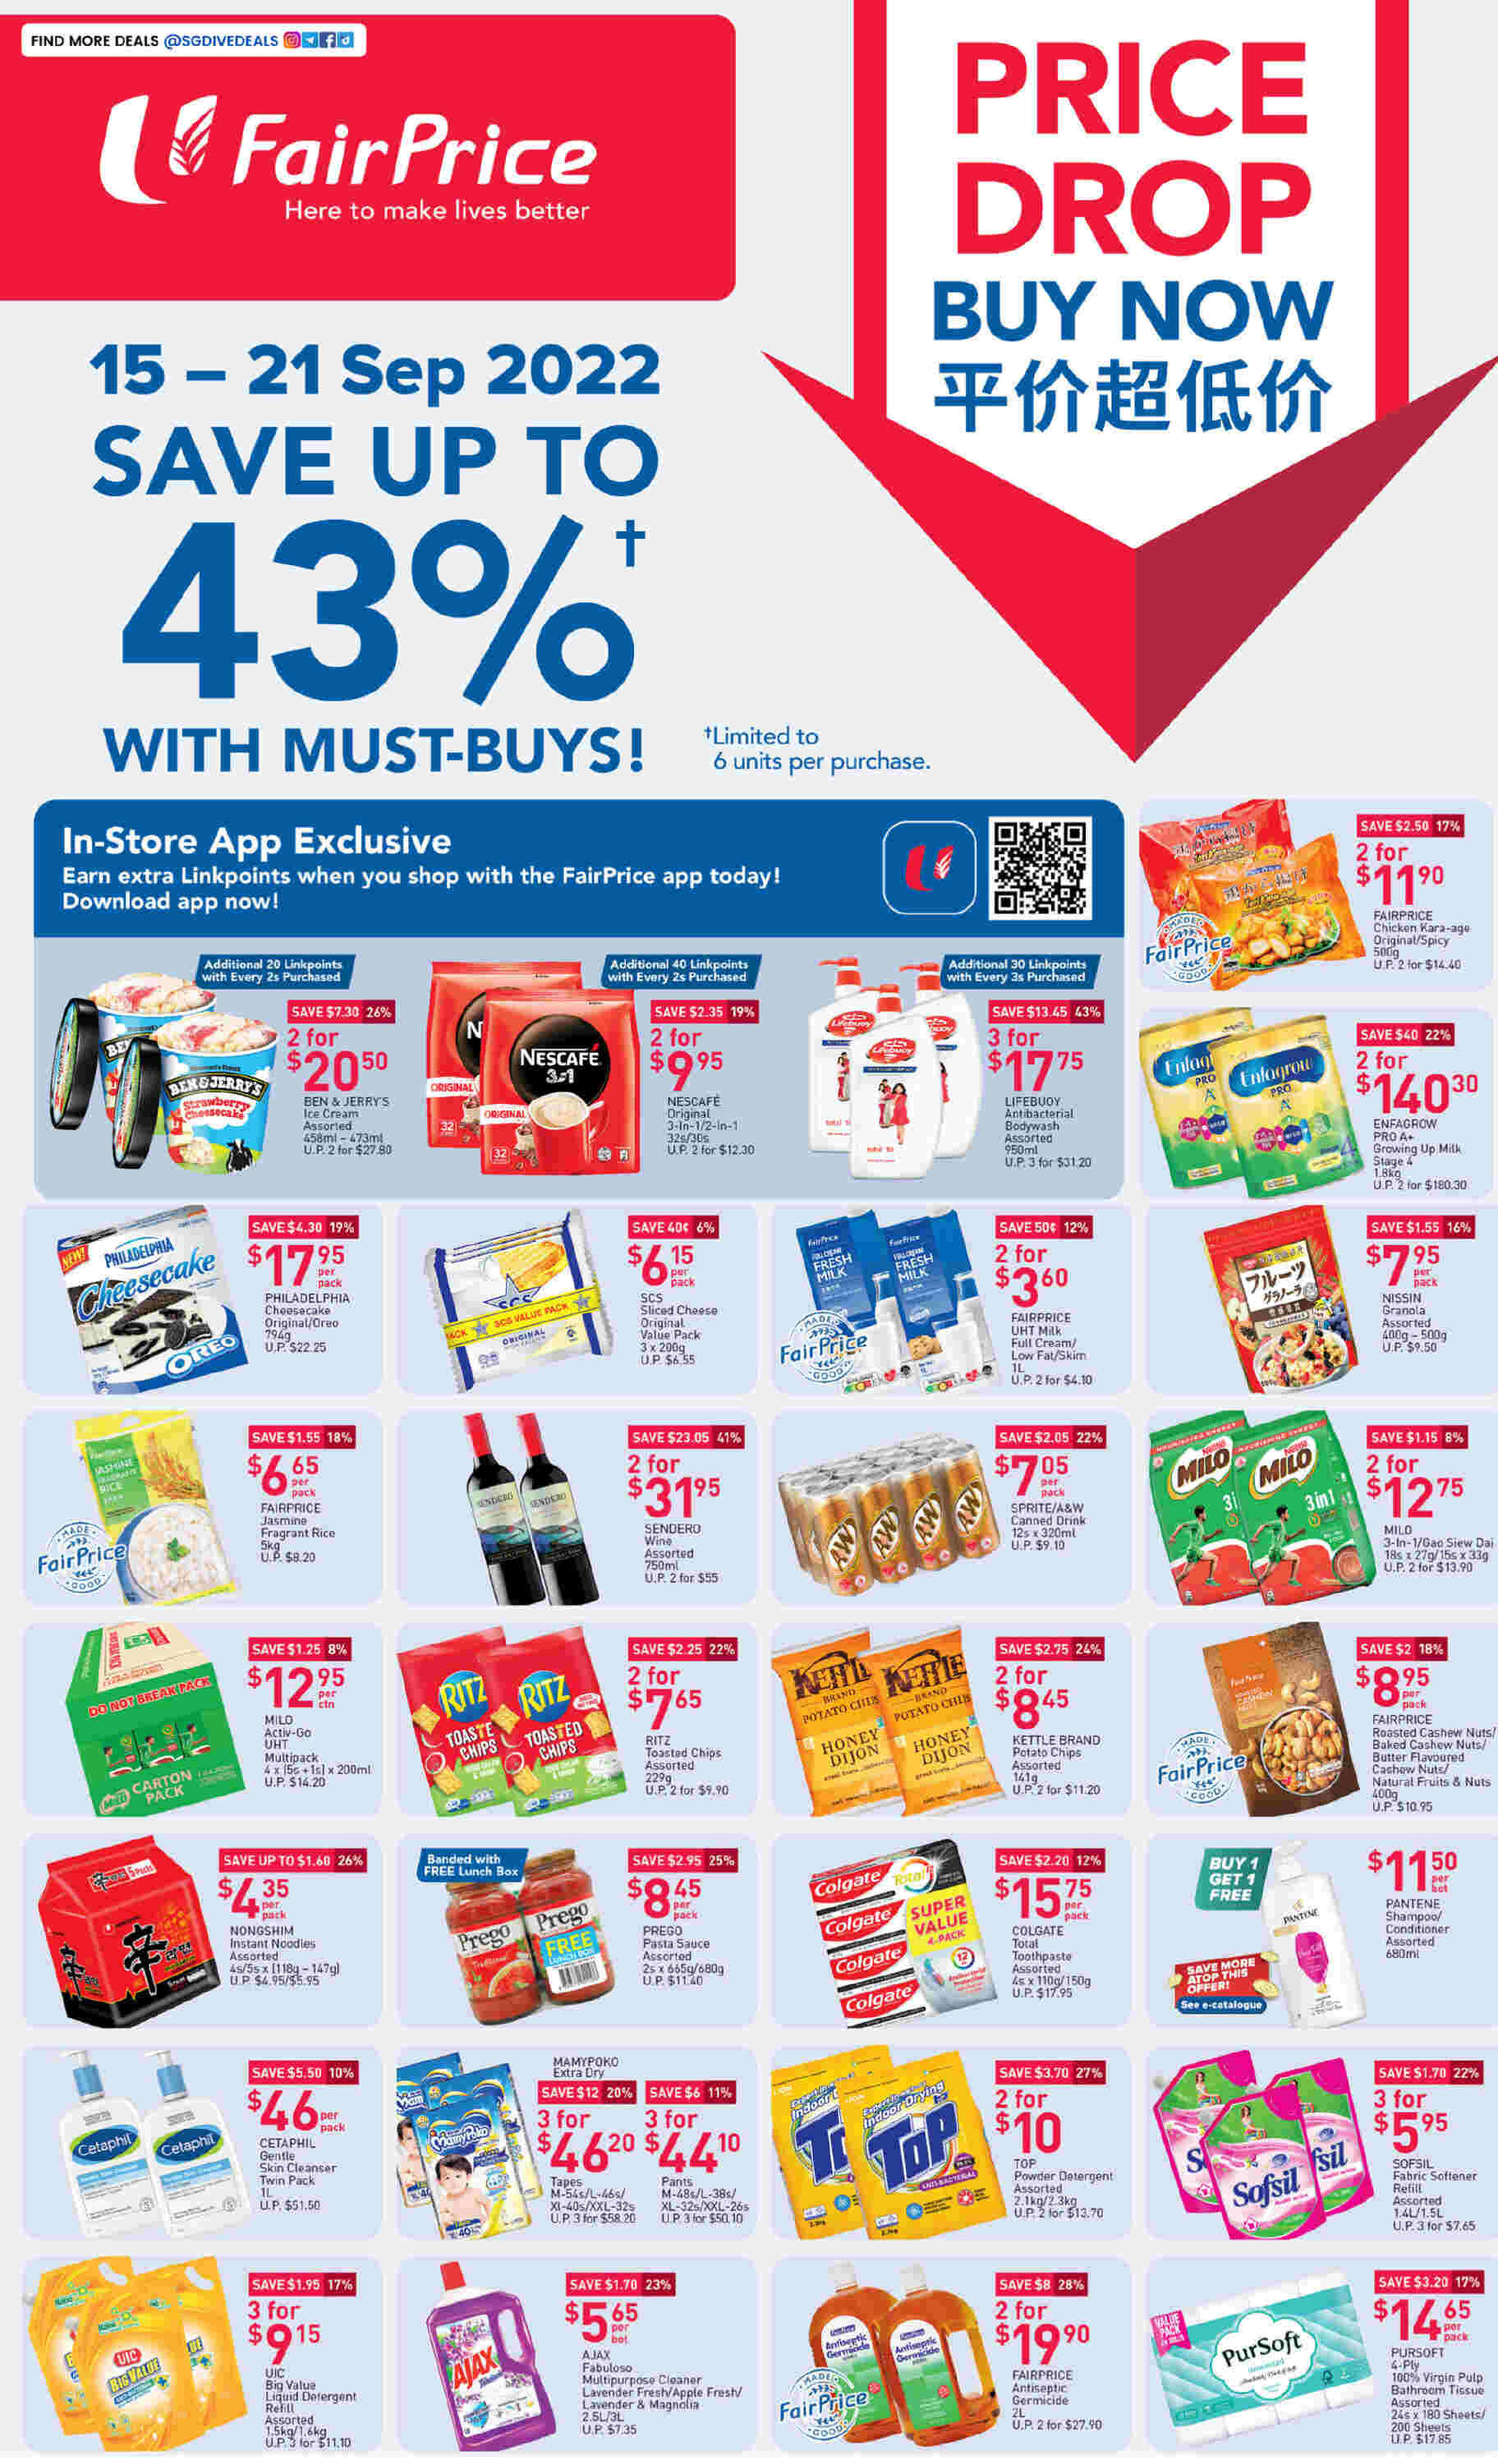 NTUC FairPrice,Price Drop Buy Now up to 43% Off